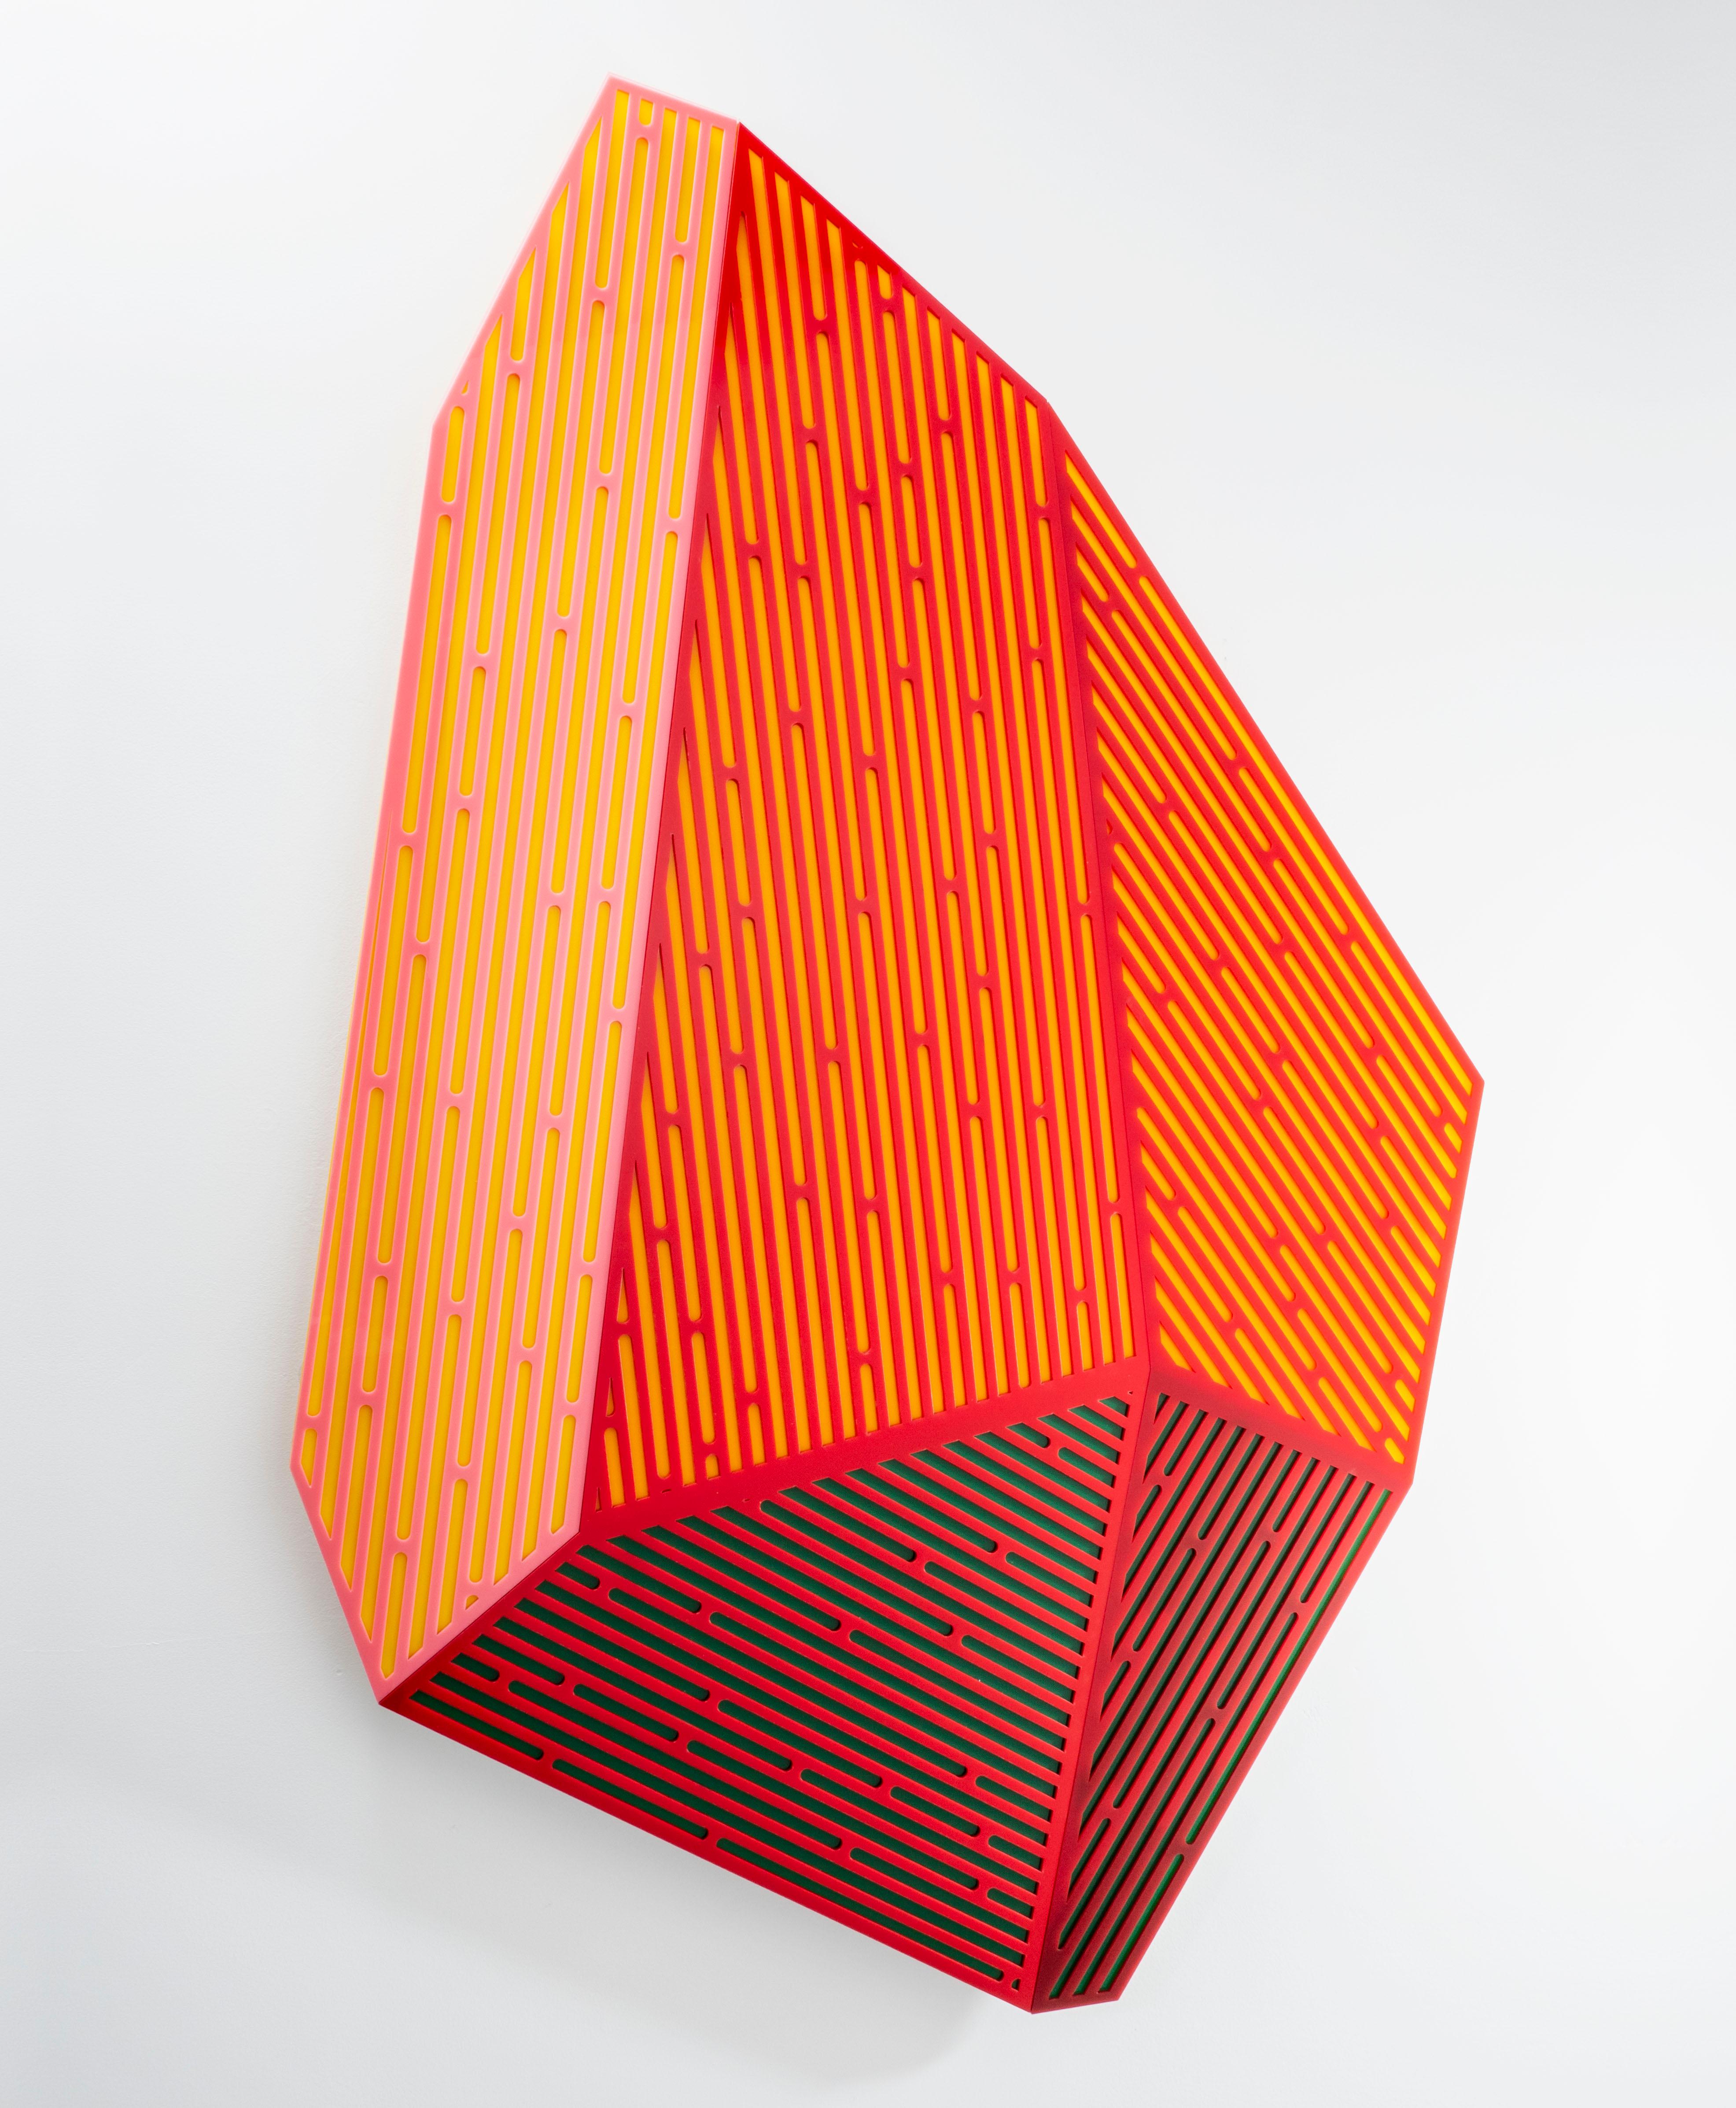 Prismatic Polygon IV -- contemporary geometric abstract wall sculpture in red